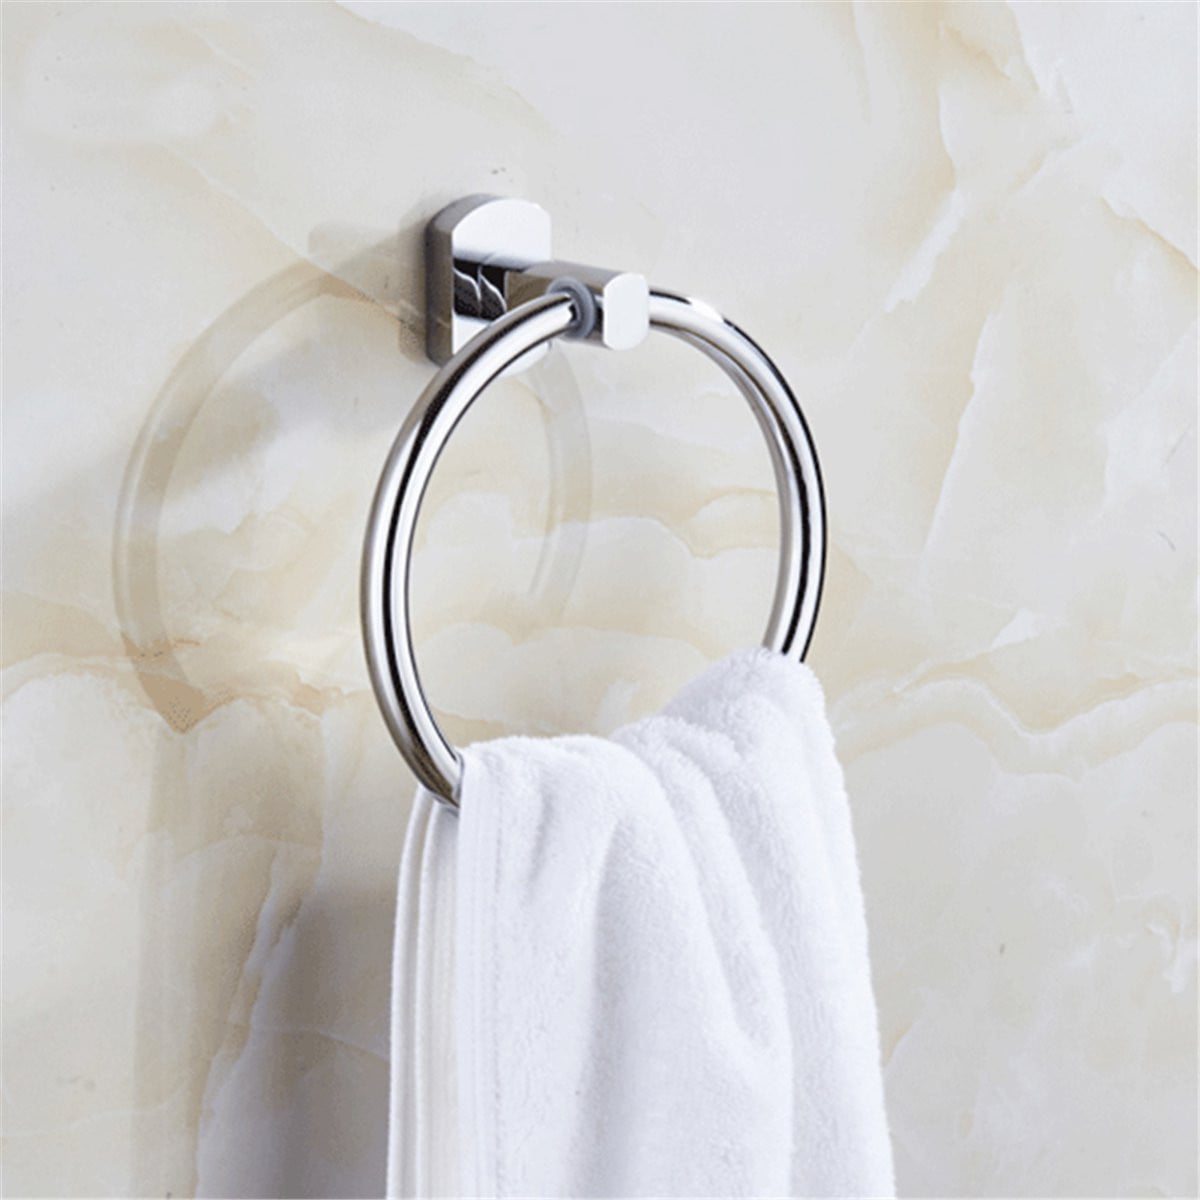 Oil Rubbed Bronze Wall Mounted Round Bathroom Towel Ring Towel Rack Holder 